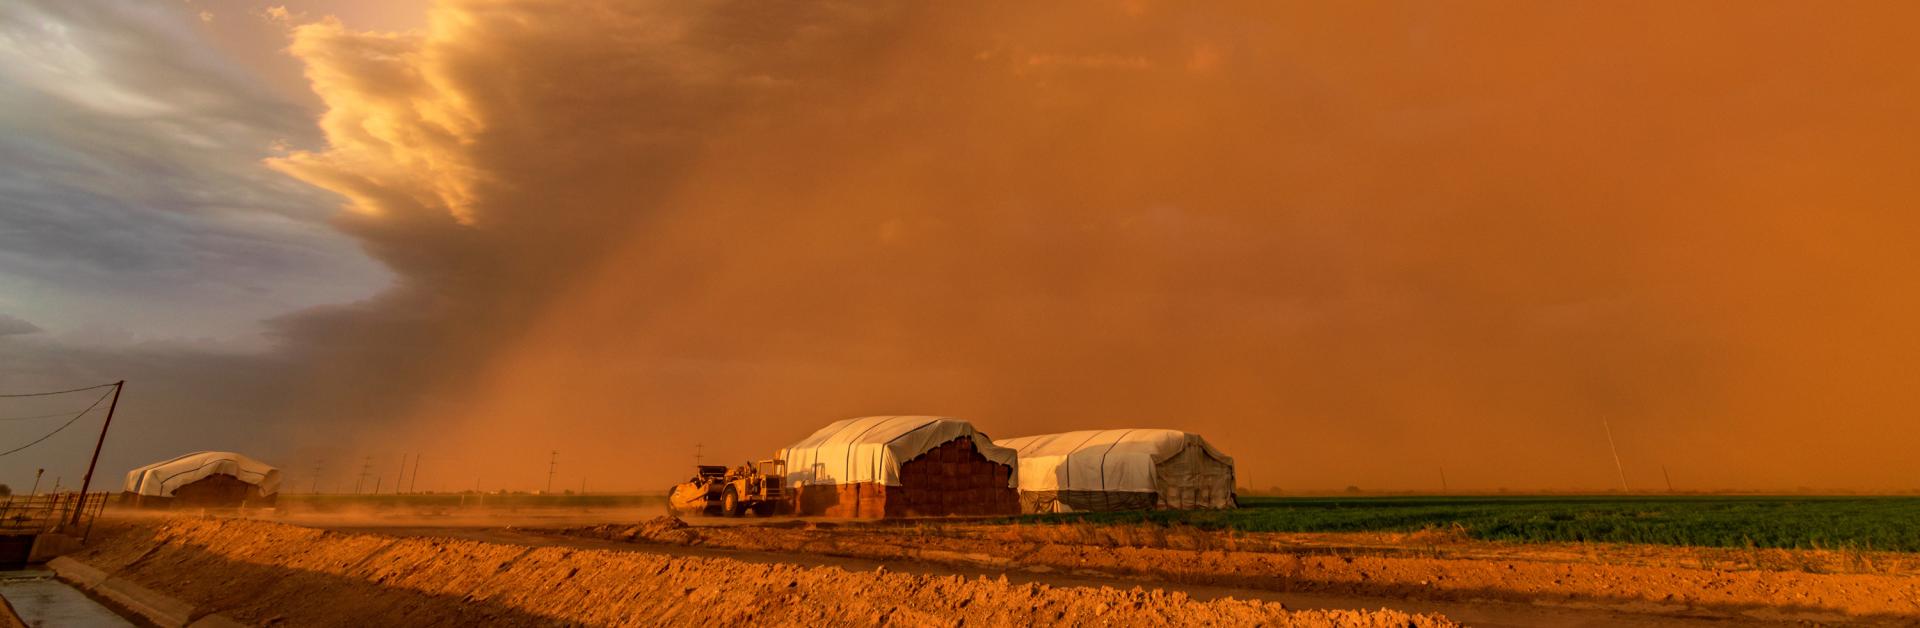 A dust storm over a farm in Arizona, representing drought impacts on respiratory mortality. Photo credit: Kyle Benne, Shutterstock.